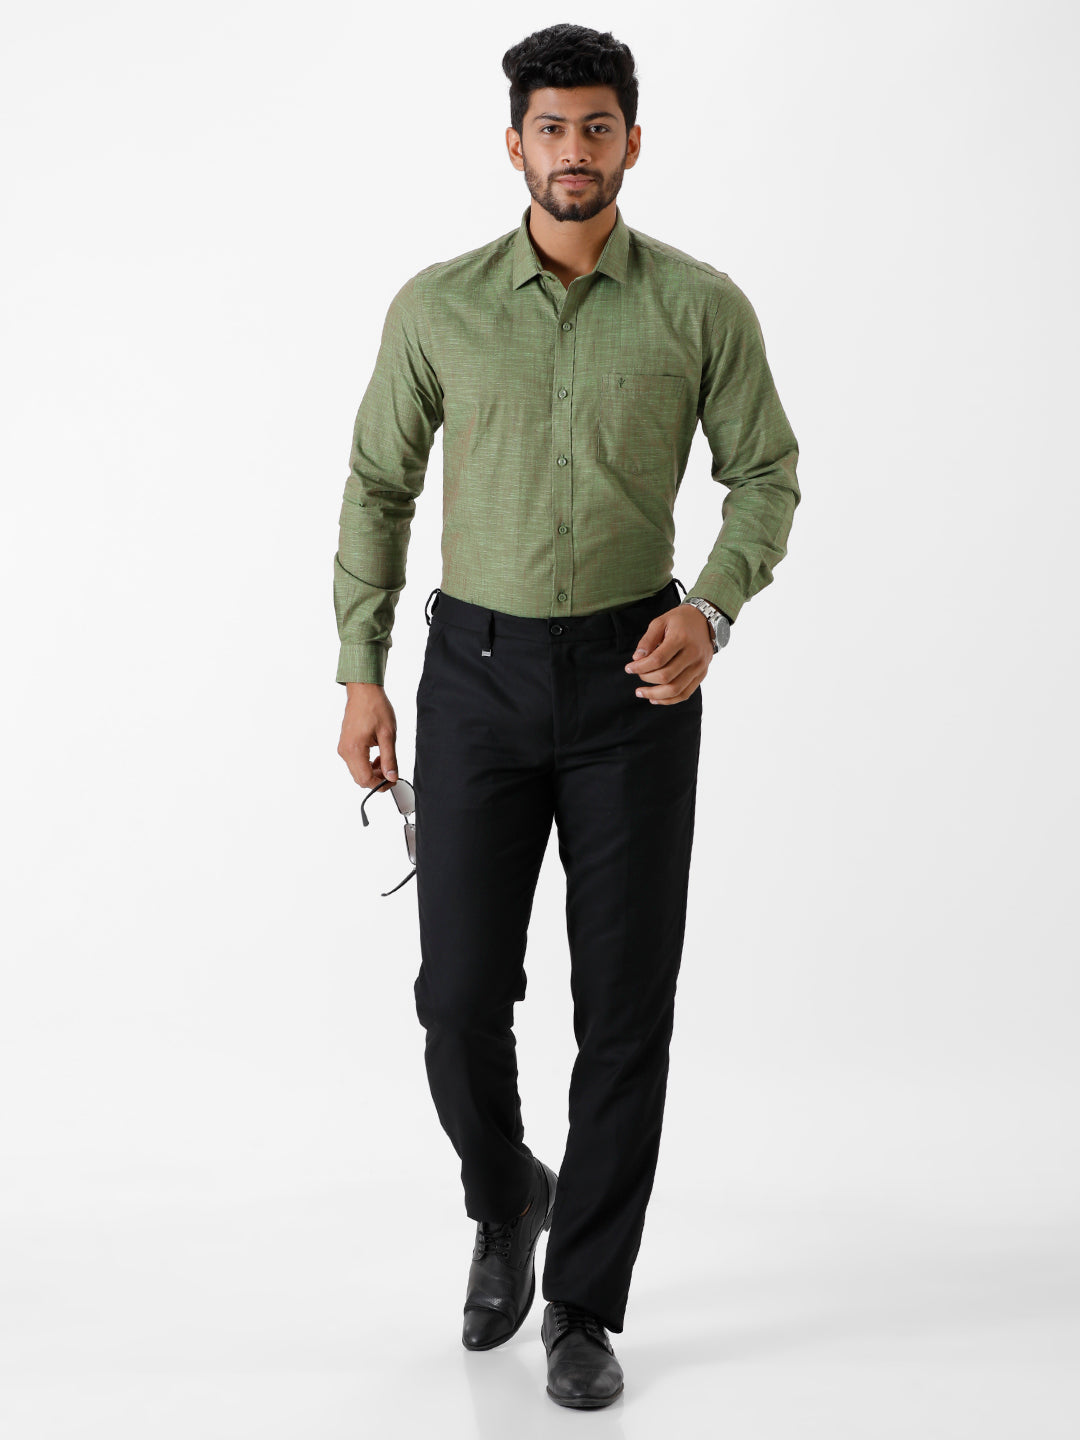 Mens Formal Shirt Full Sleeves Green CL2 GT19-Front view